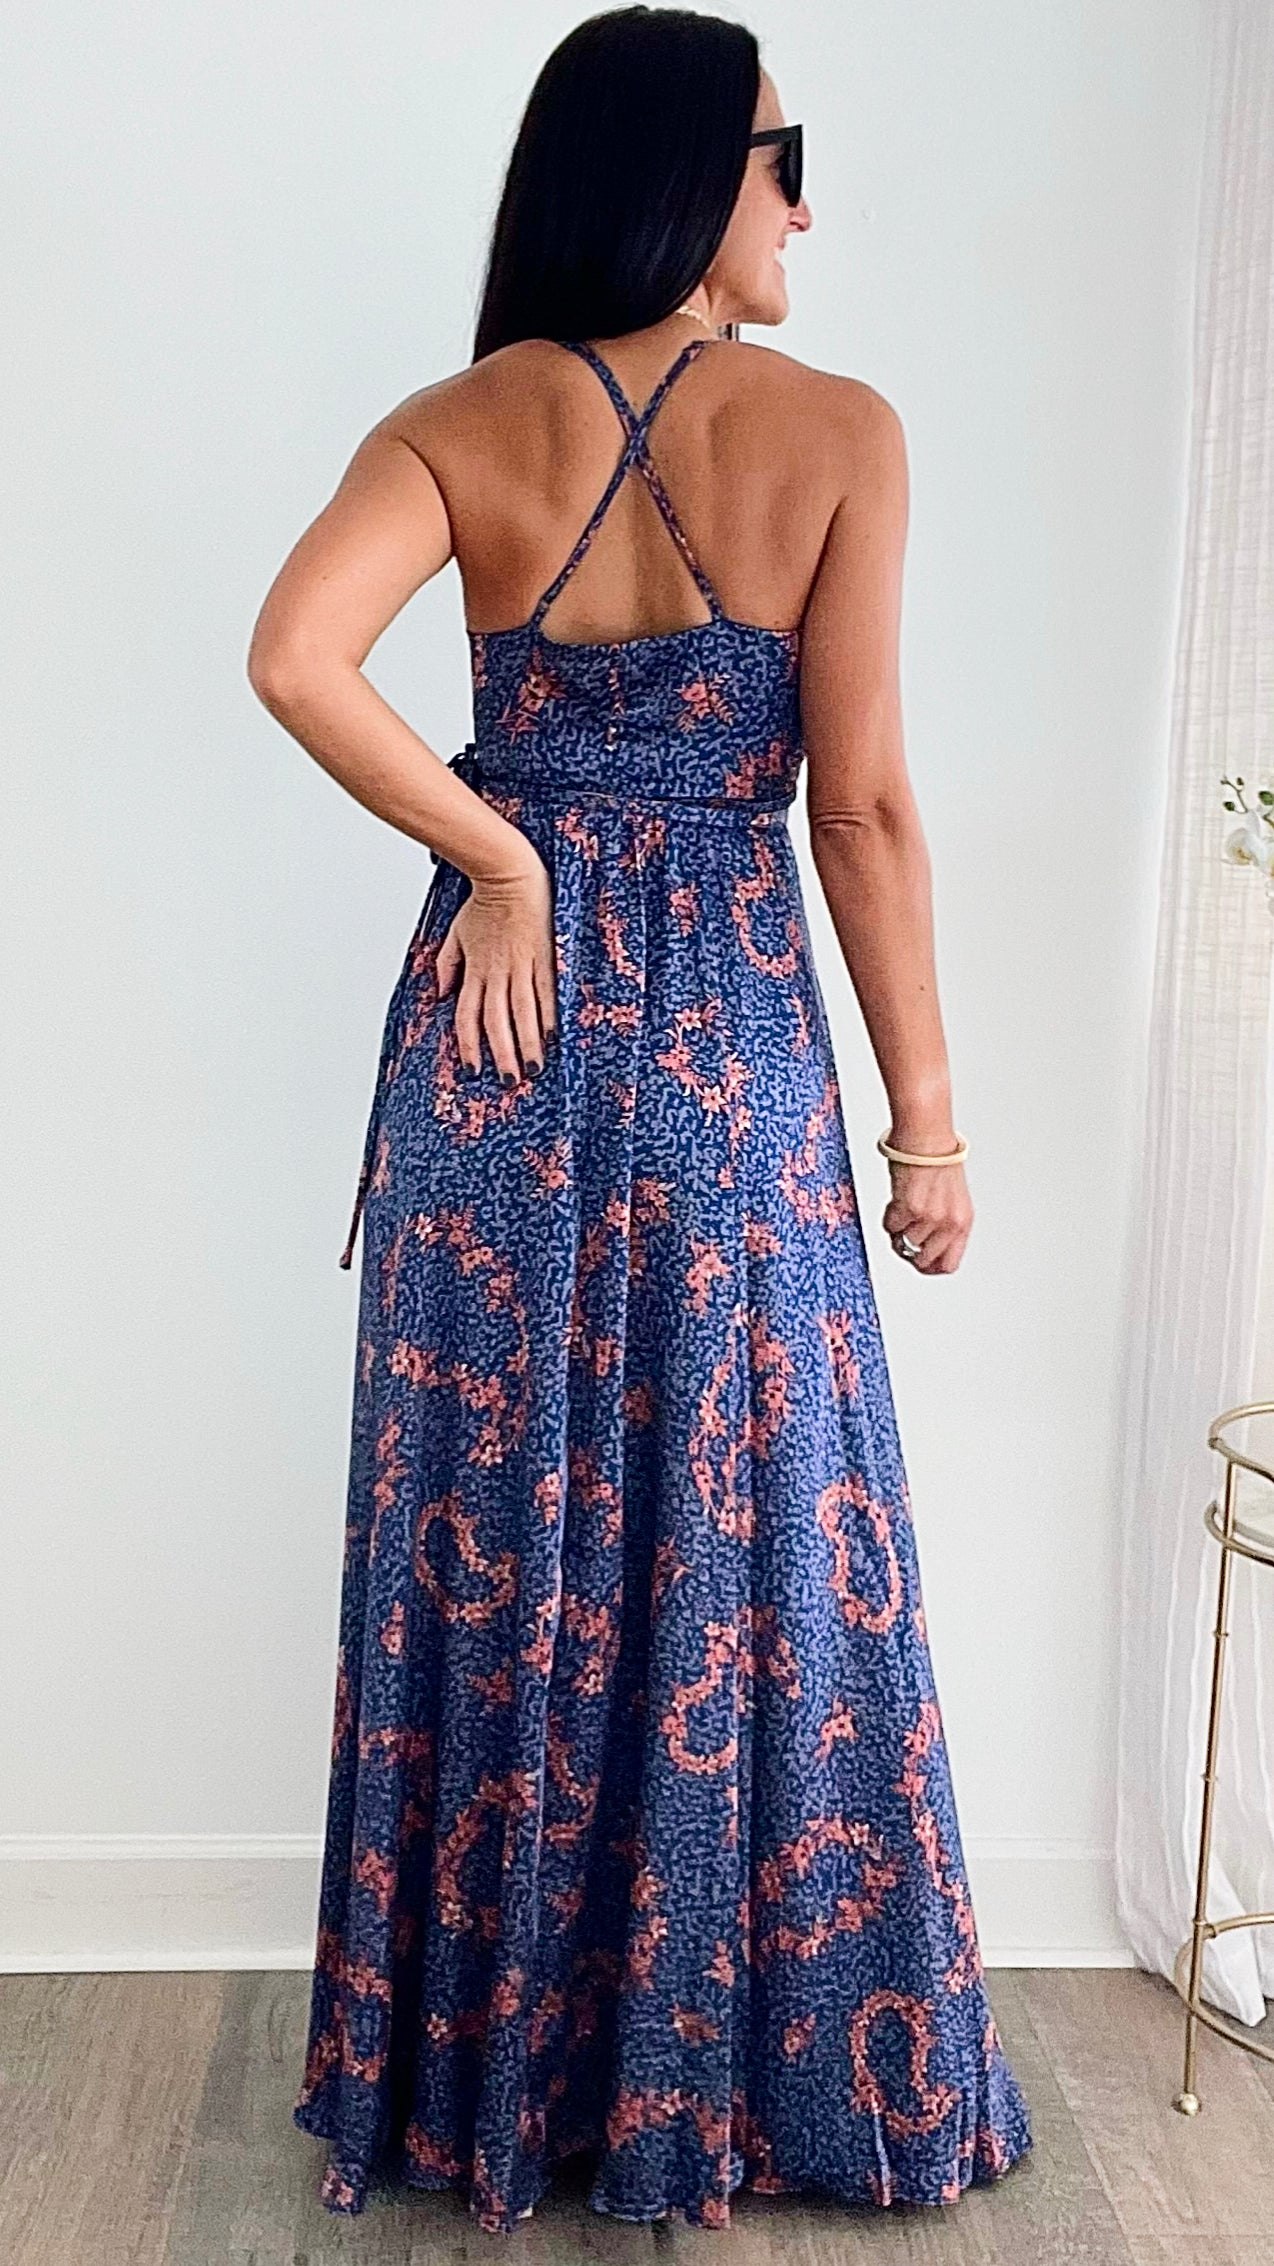 Purple Sleeveless Wrap Maxi Dress-200 dresses/jumpsuits/rompers-HYFVE-Coastal Bloom Boutique, find the trendiest versions of the popular styles and looks Located in Indialantic, FL